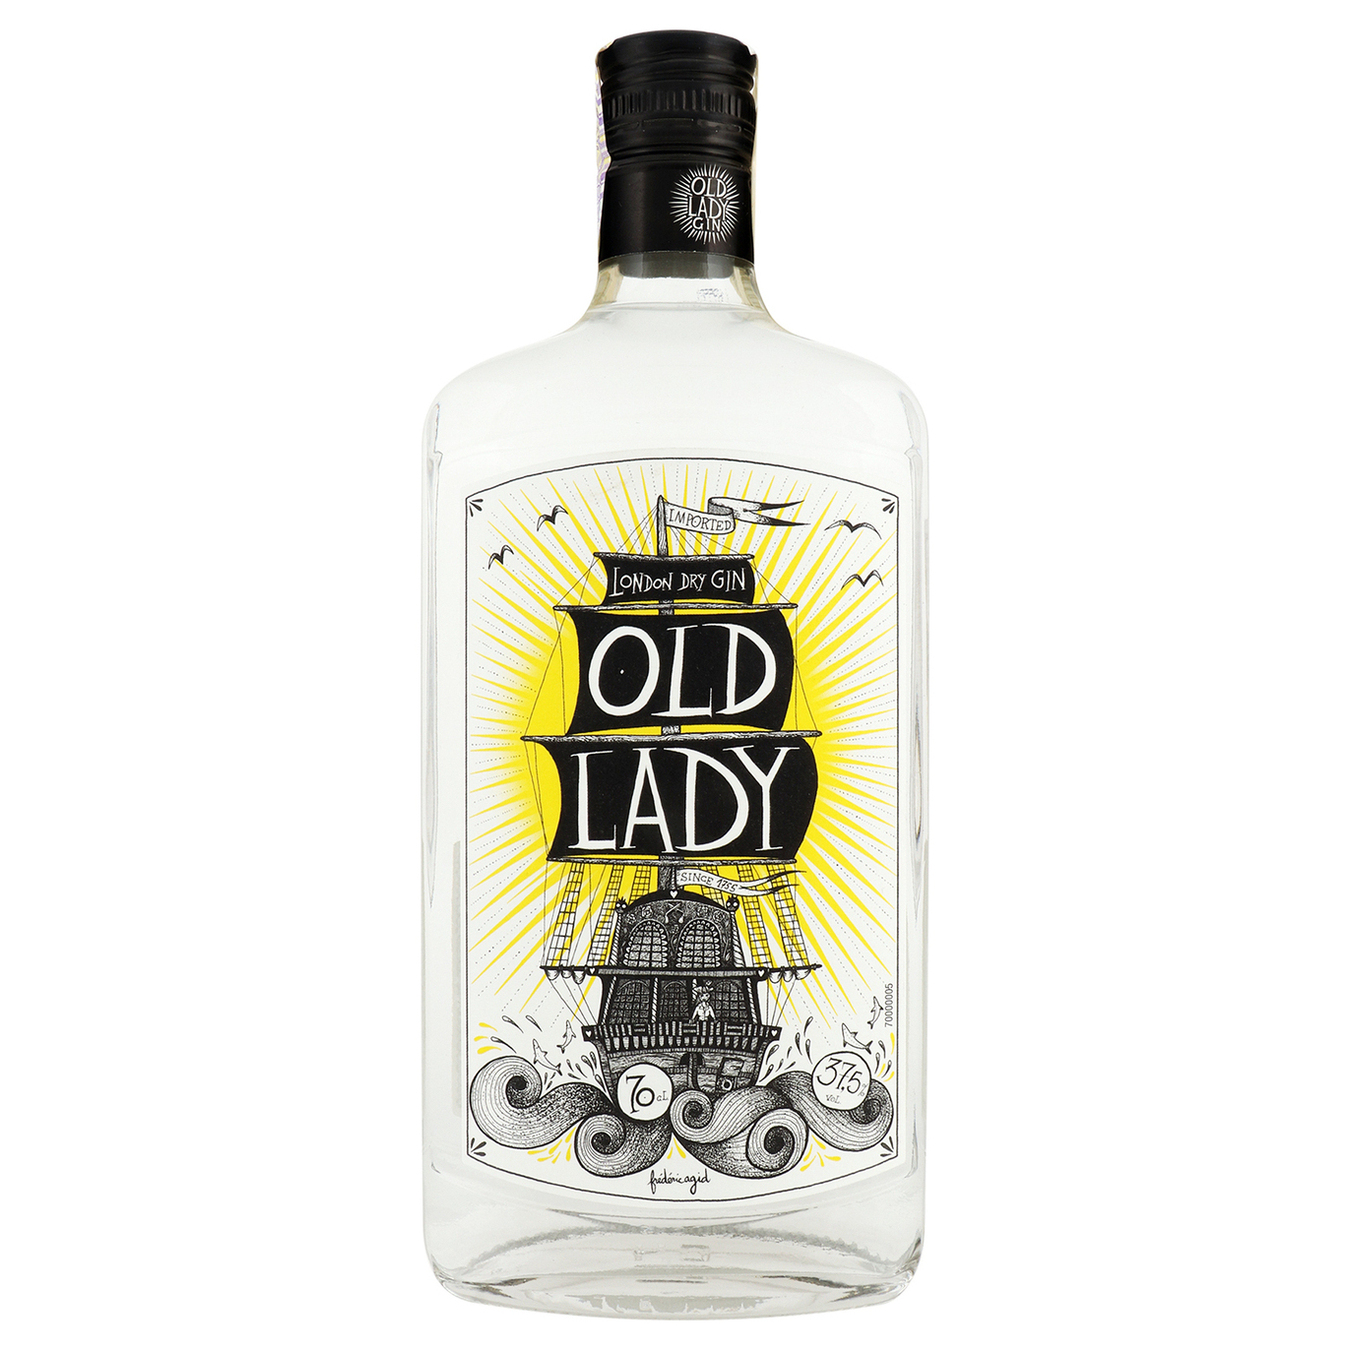 Old Lady London dry gin 37,5% 0,7l